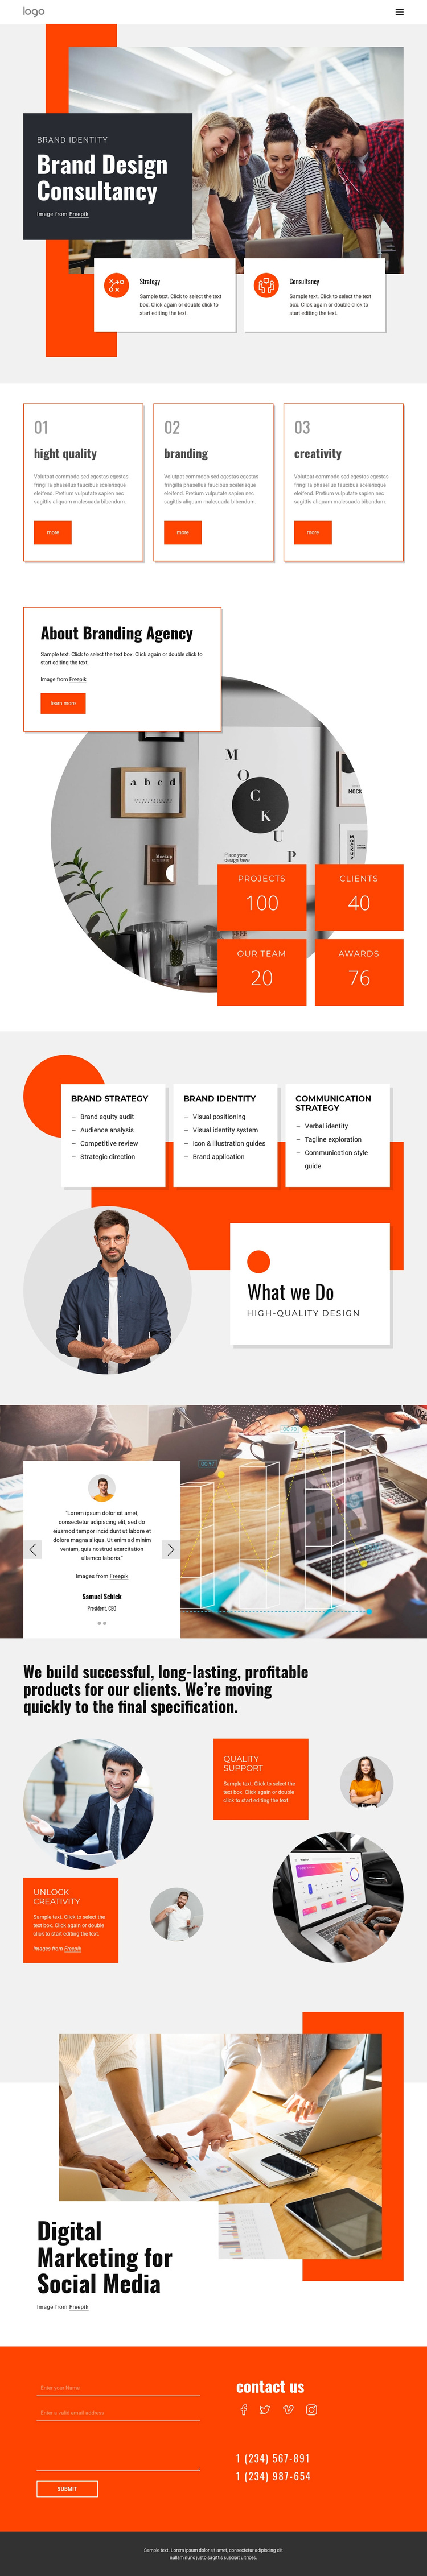 Growth design agency Template